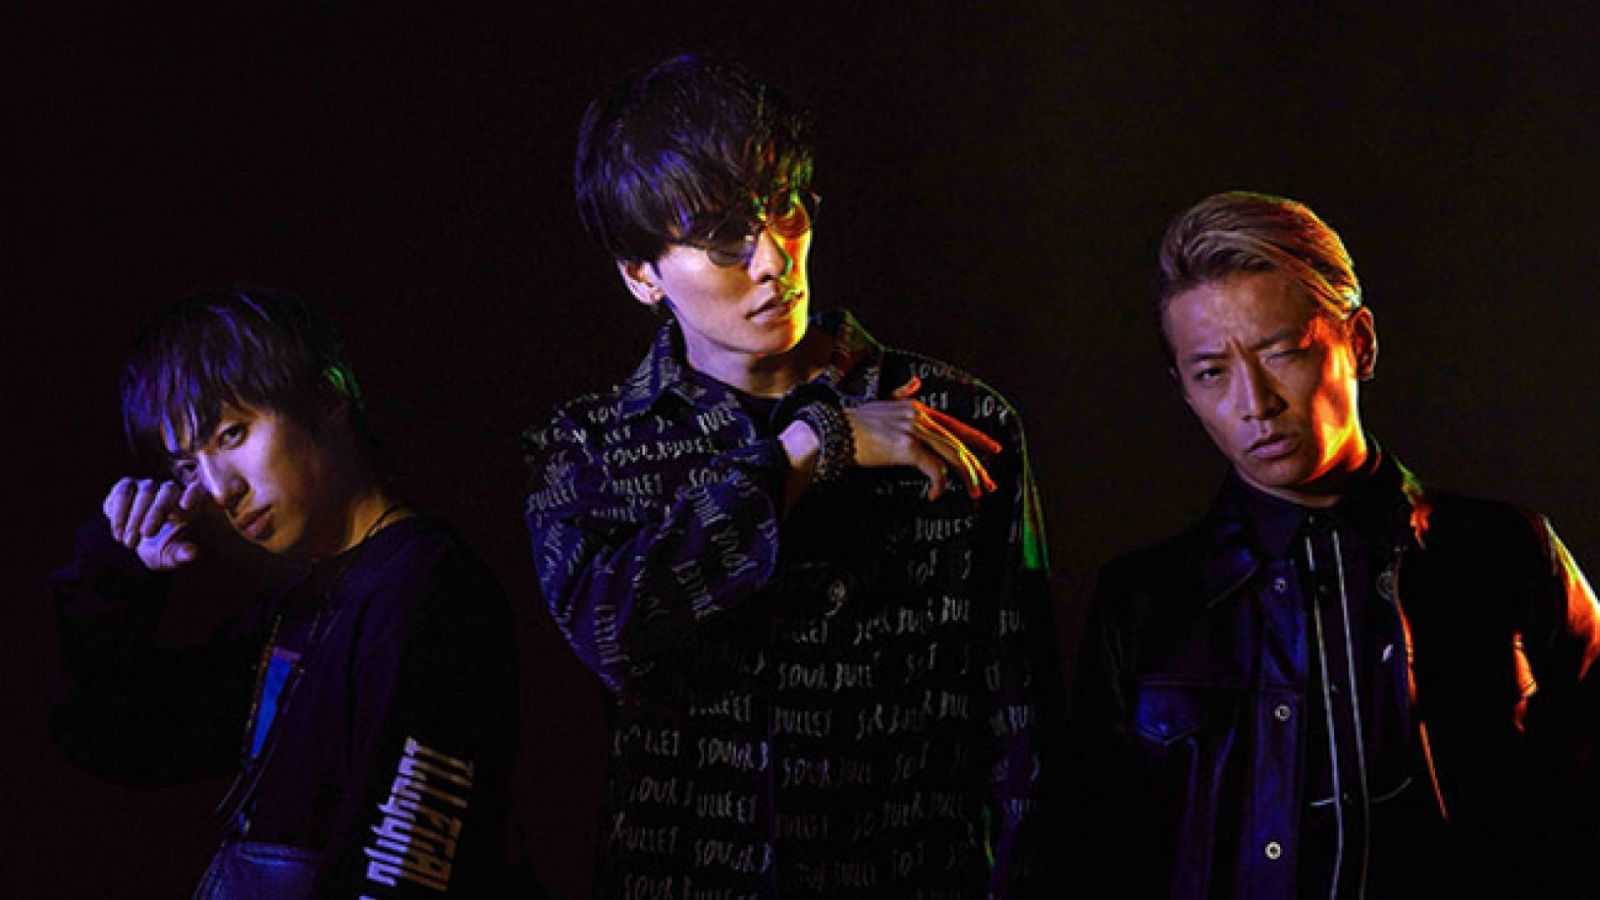 w-inds. wyda nowe koncertowe DVD i Blu-ray © w-inds. All rights reserved.